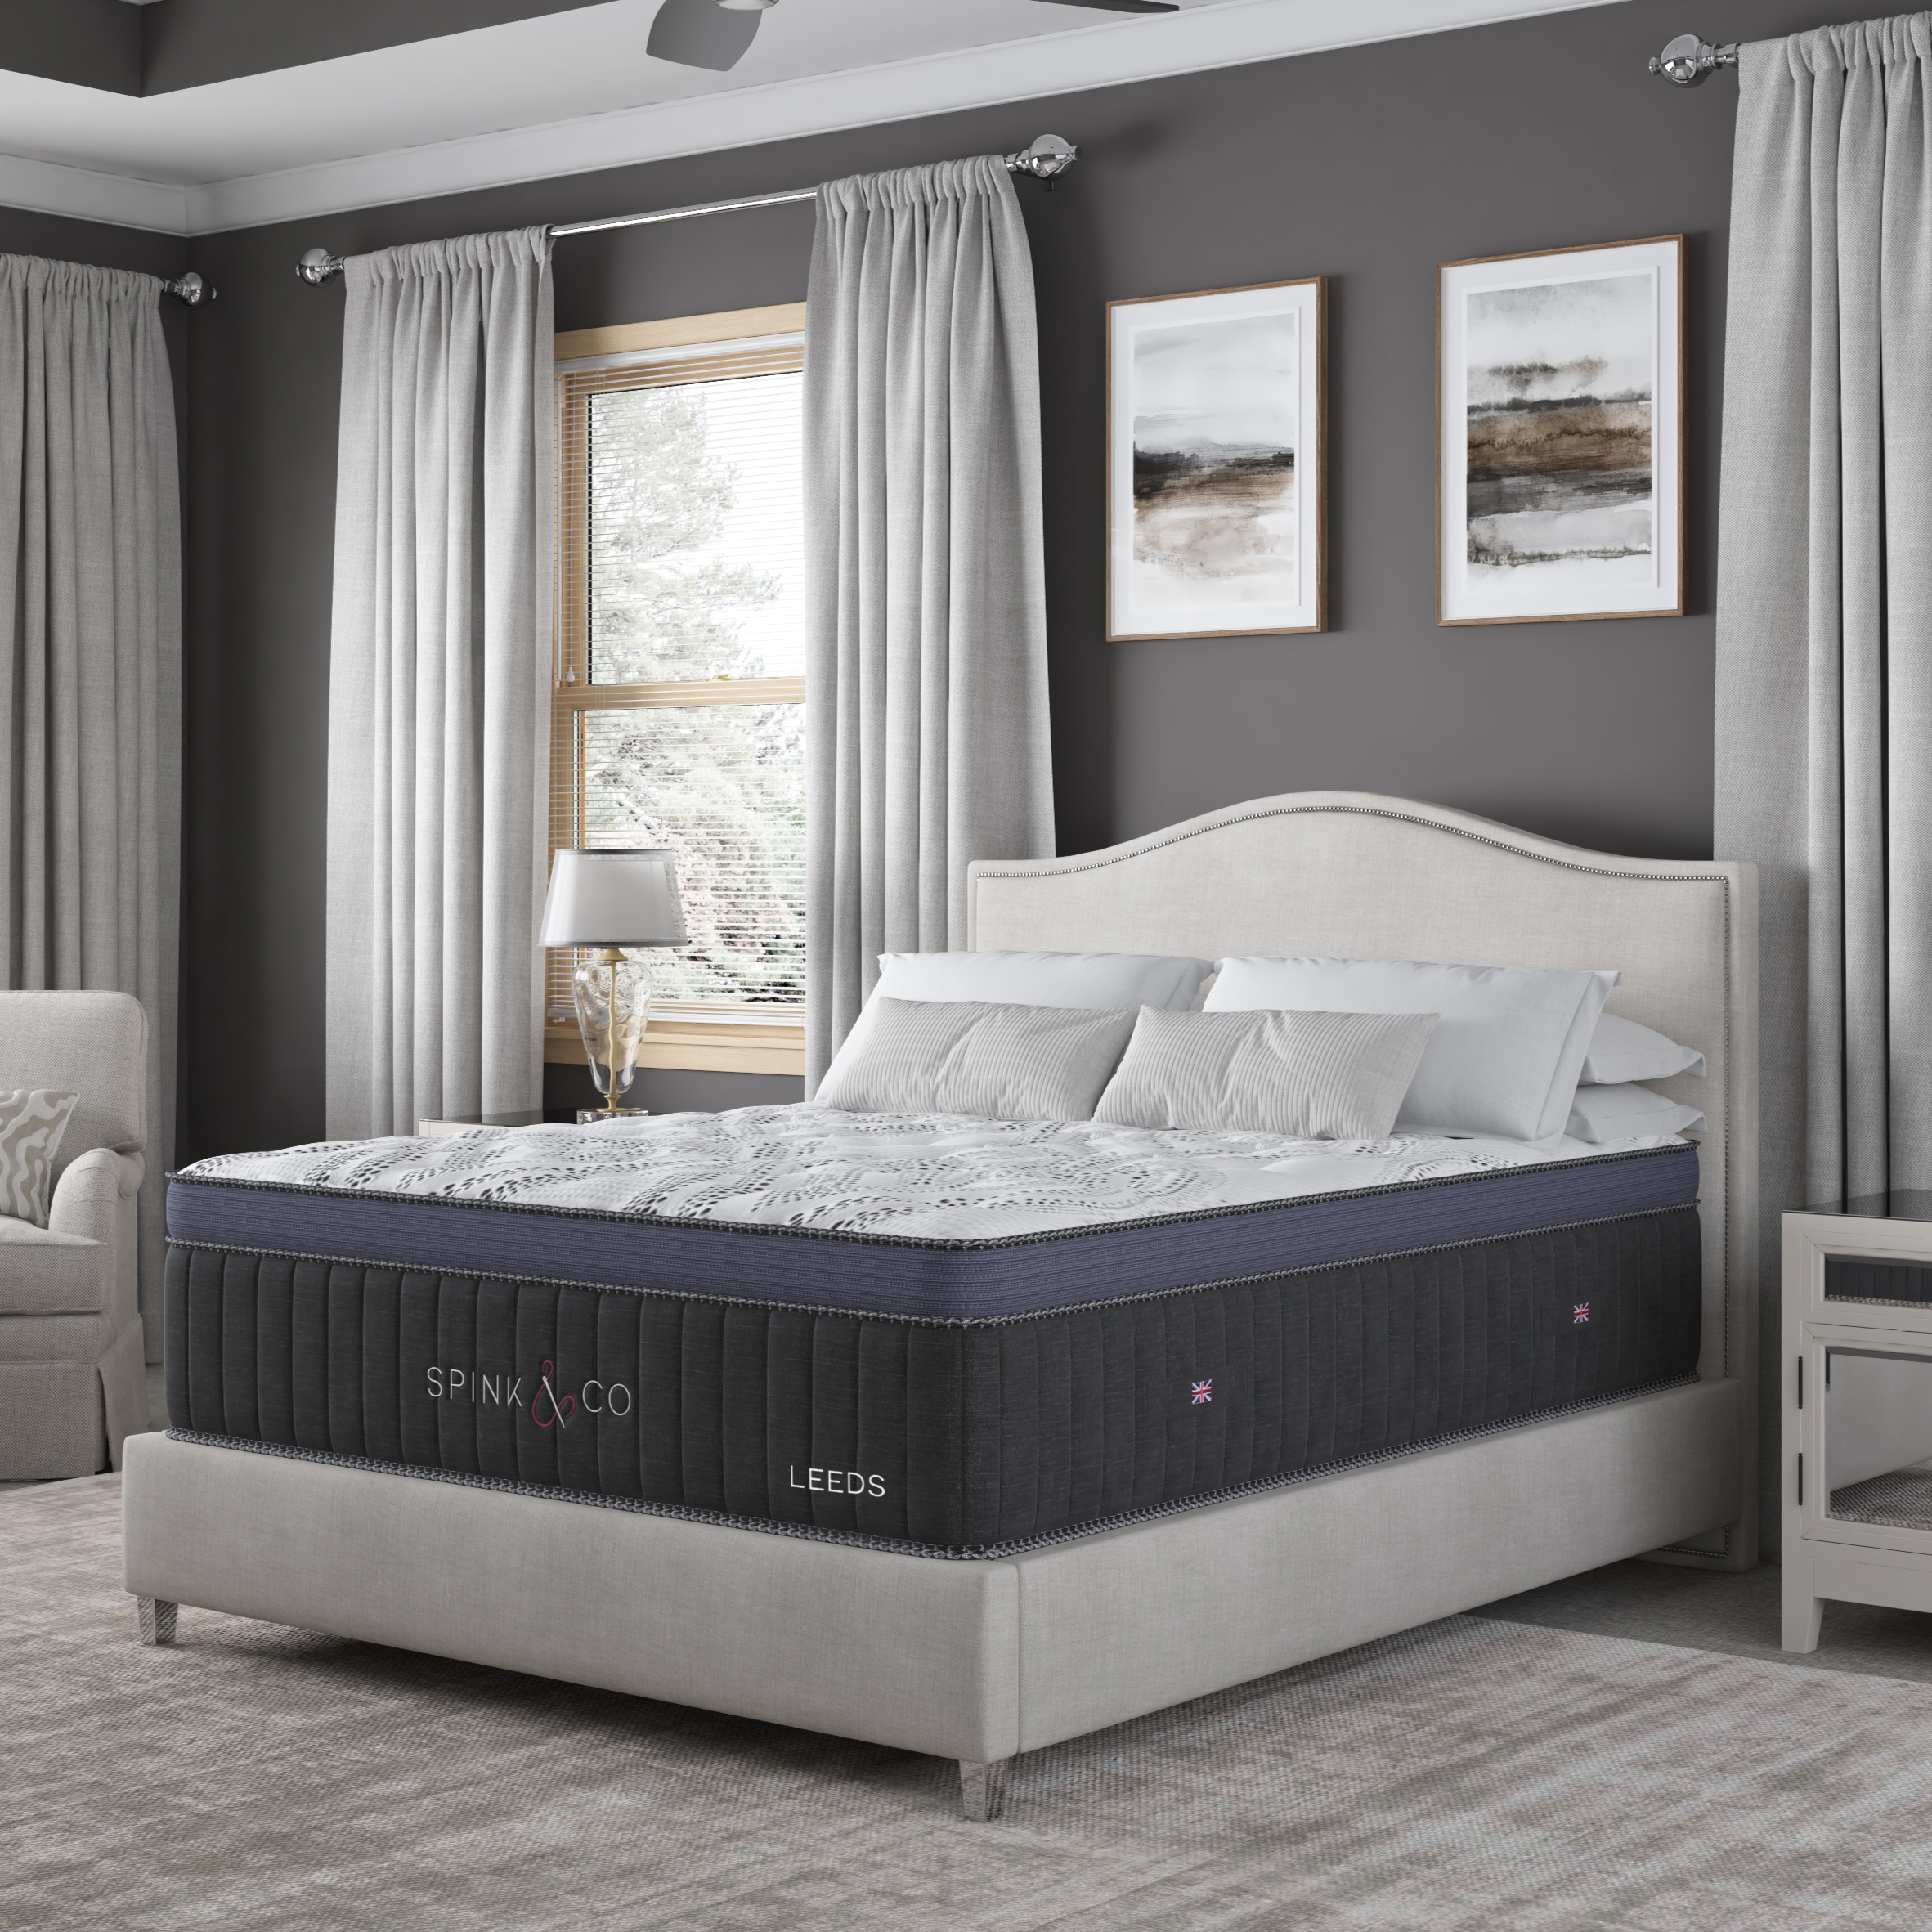 Picture of Spink & Co Leeds Luxury Firm Mattress